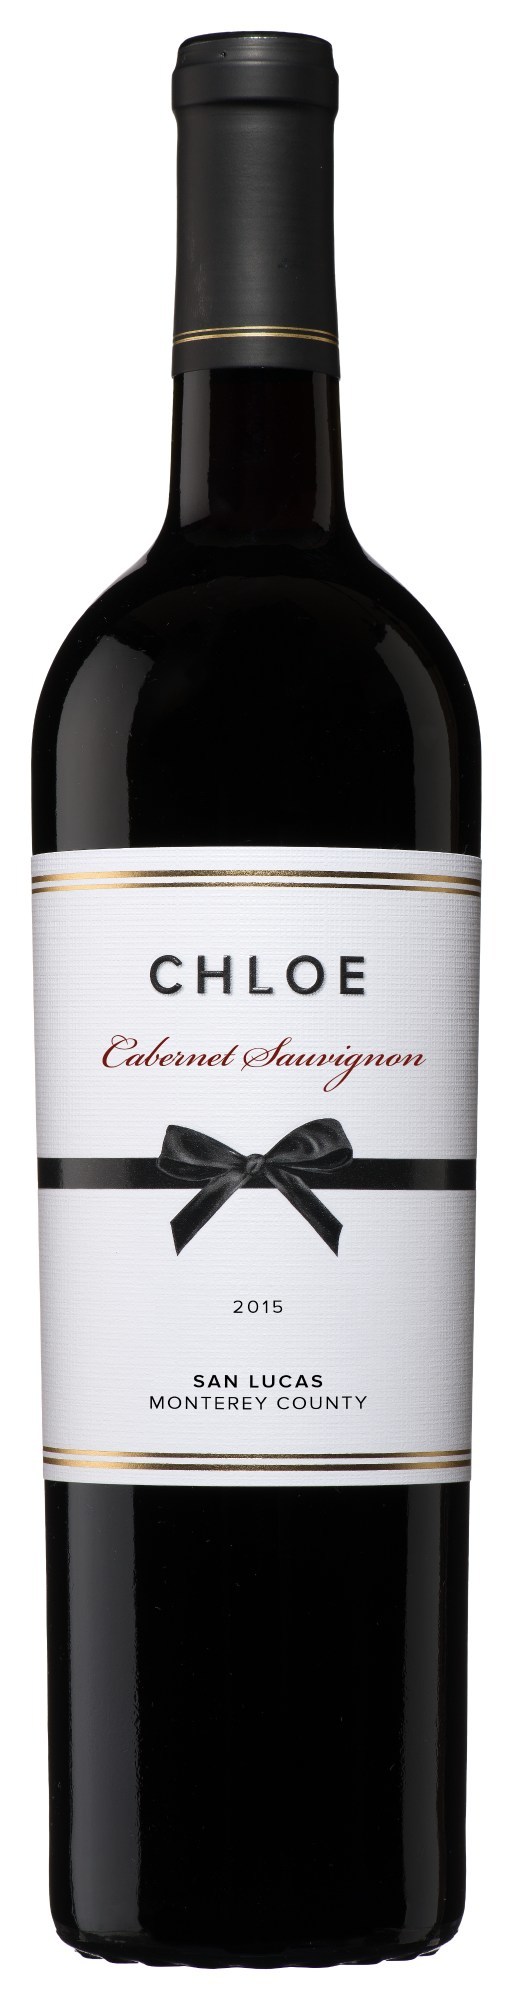 chloe-wine-collection-releases-new-bold-and-sophisticated-cabernet